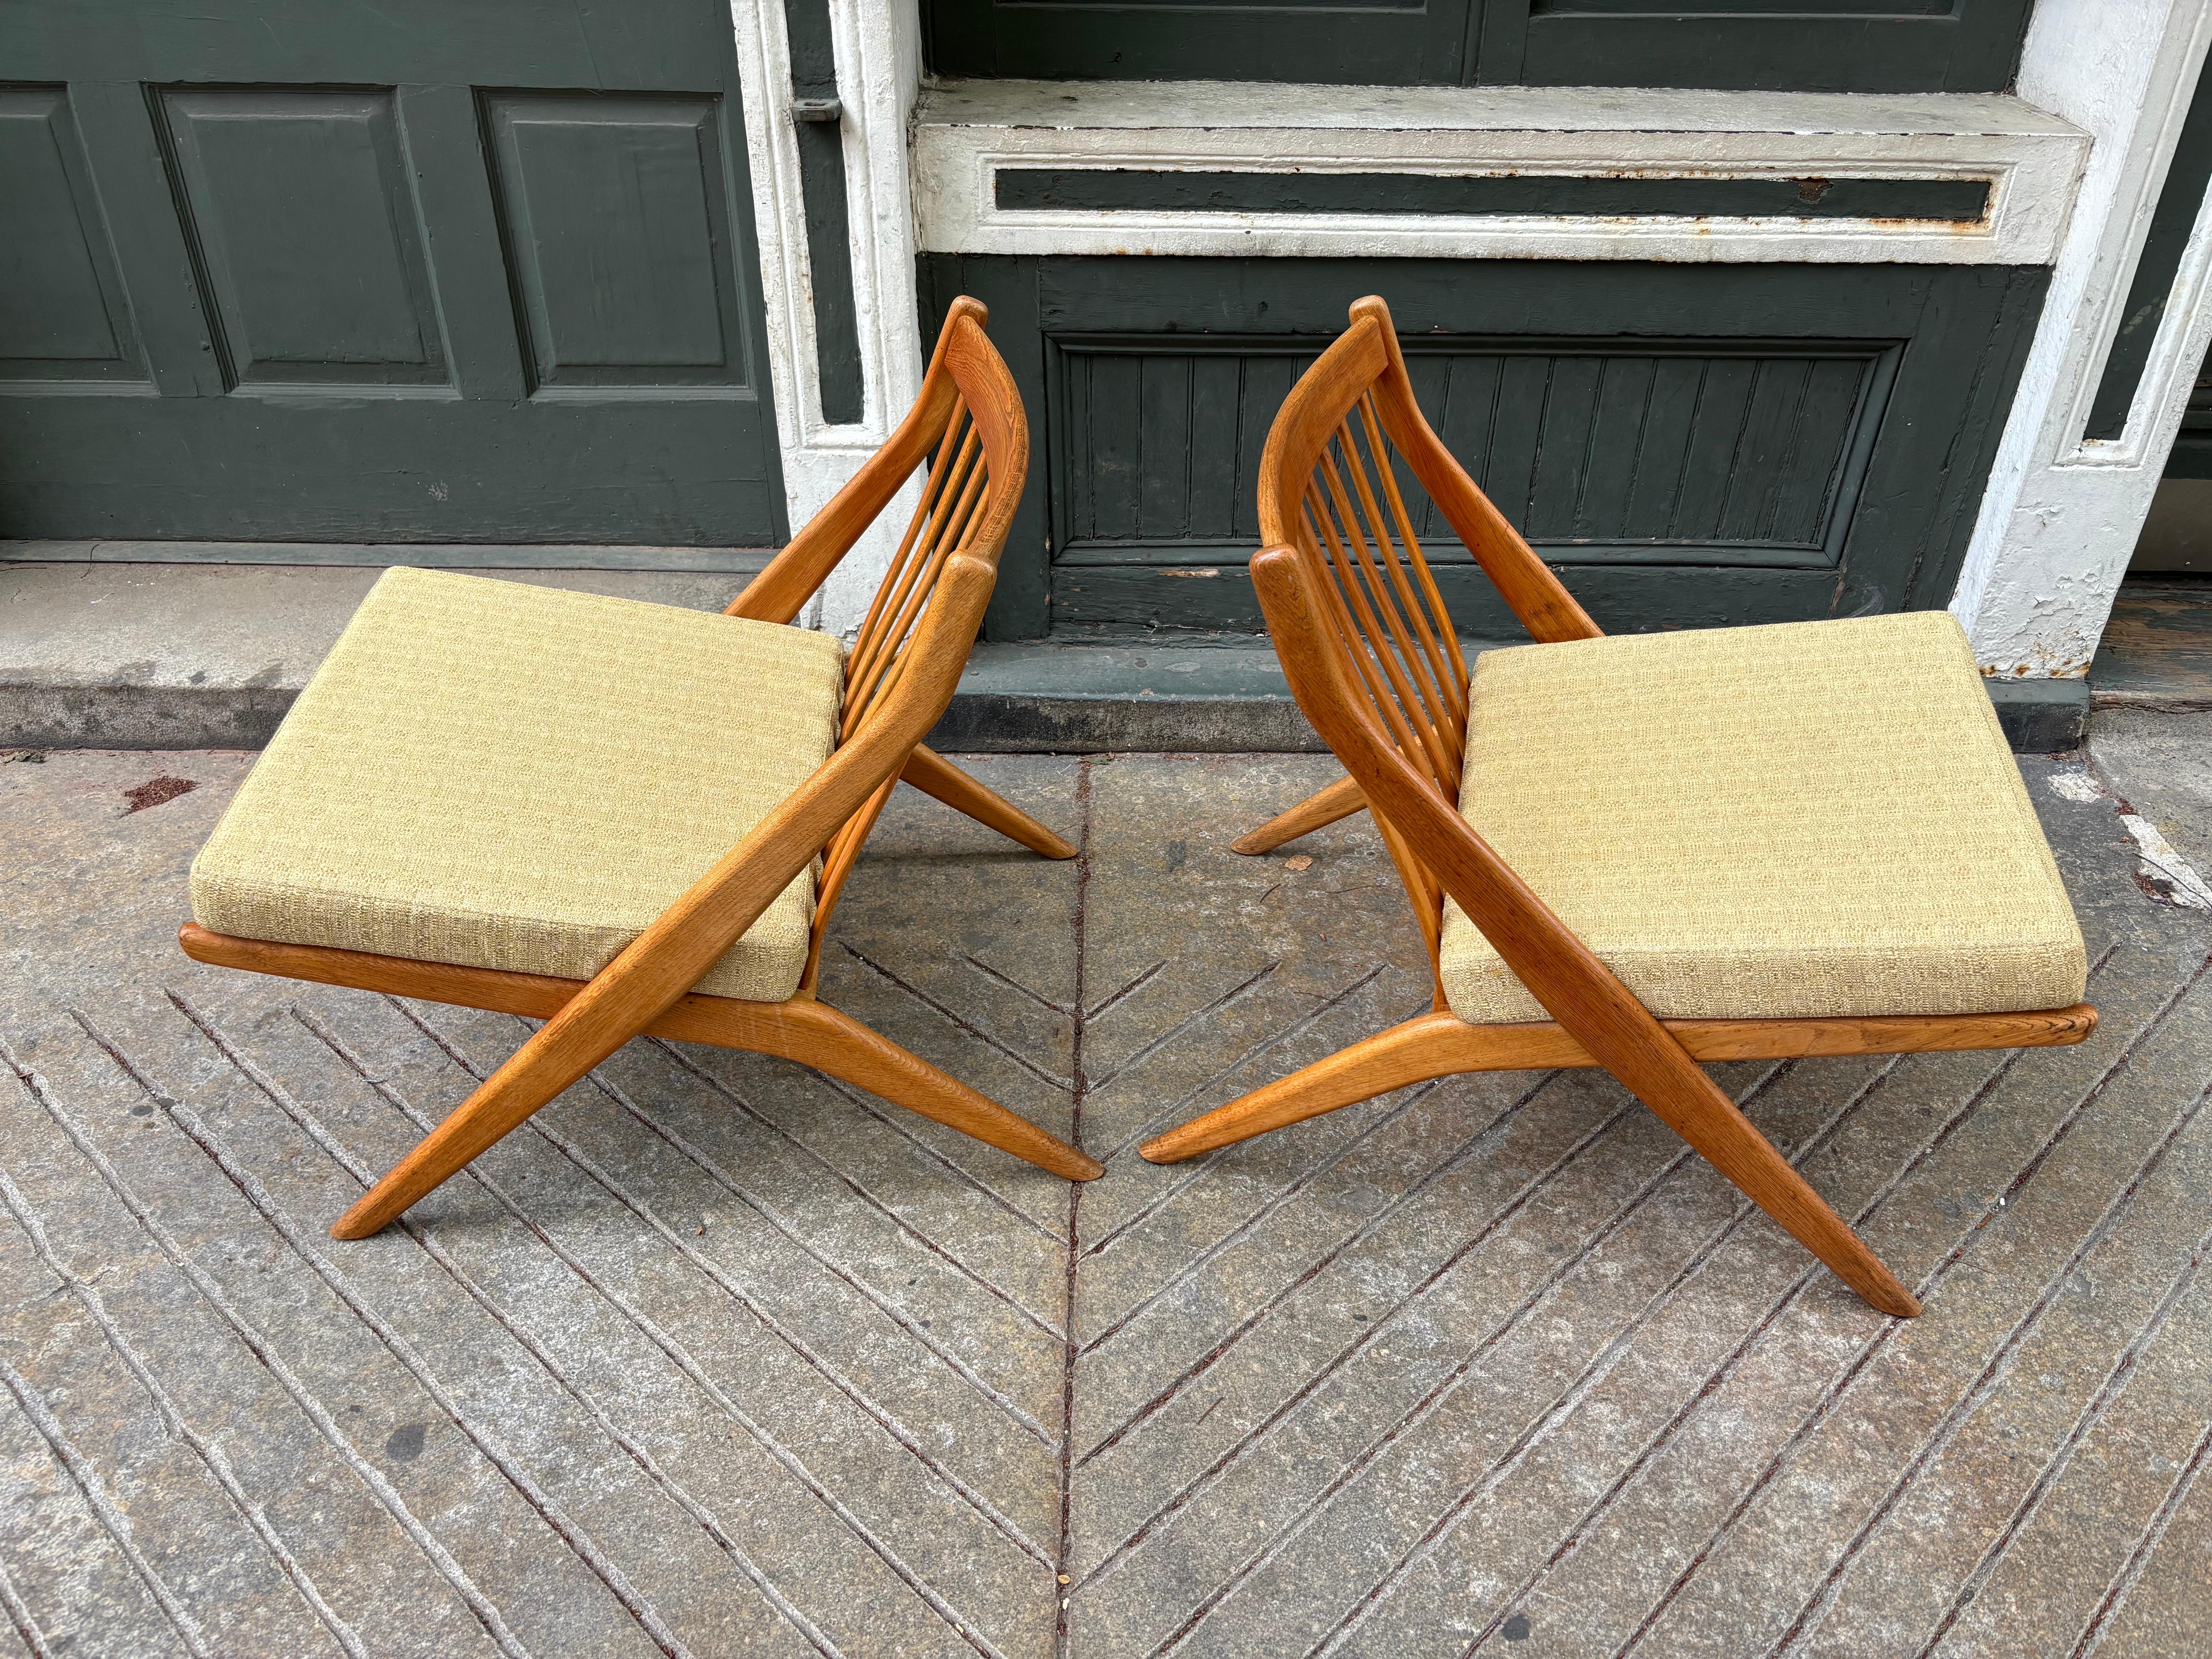 Folke Ohlsson for DUX of Sweden Pair of Scissor Chairs.  Oak frames with slat backs and removable Upholstered Cushions.  Chairs were reupholstered about 15 years ago.  Fabric still looks good with slight overall fading.  Chairs are very solid! 